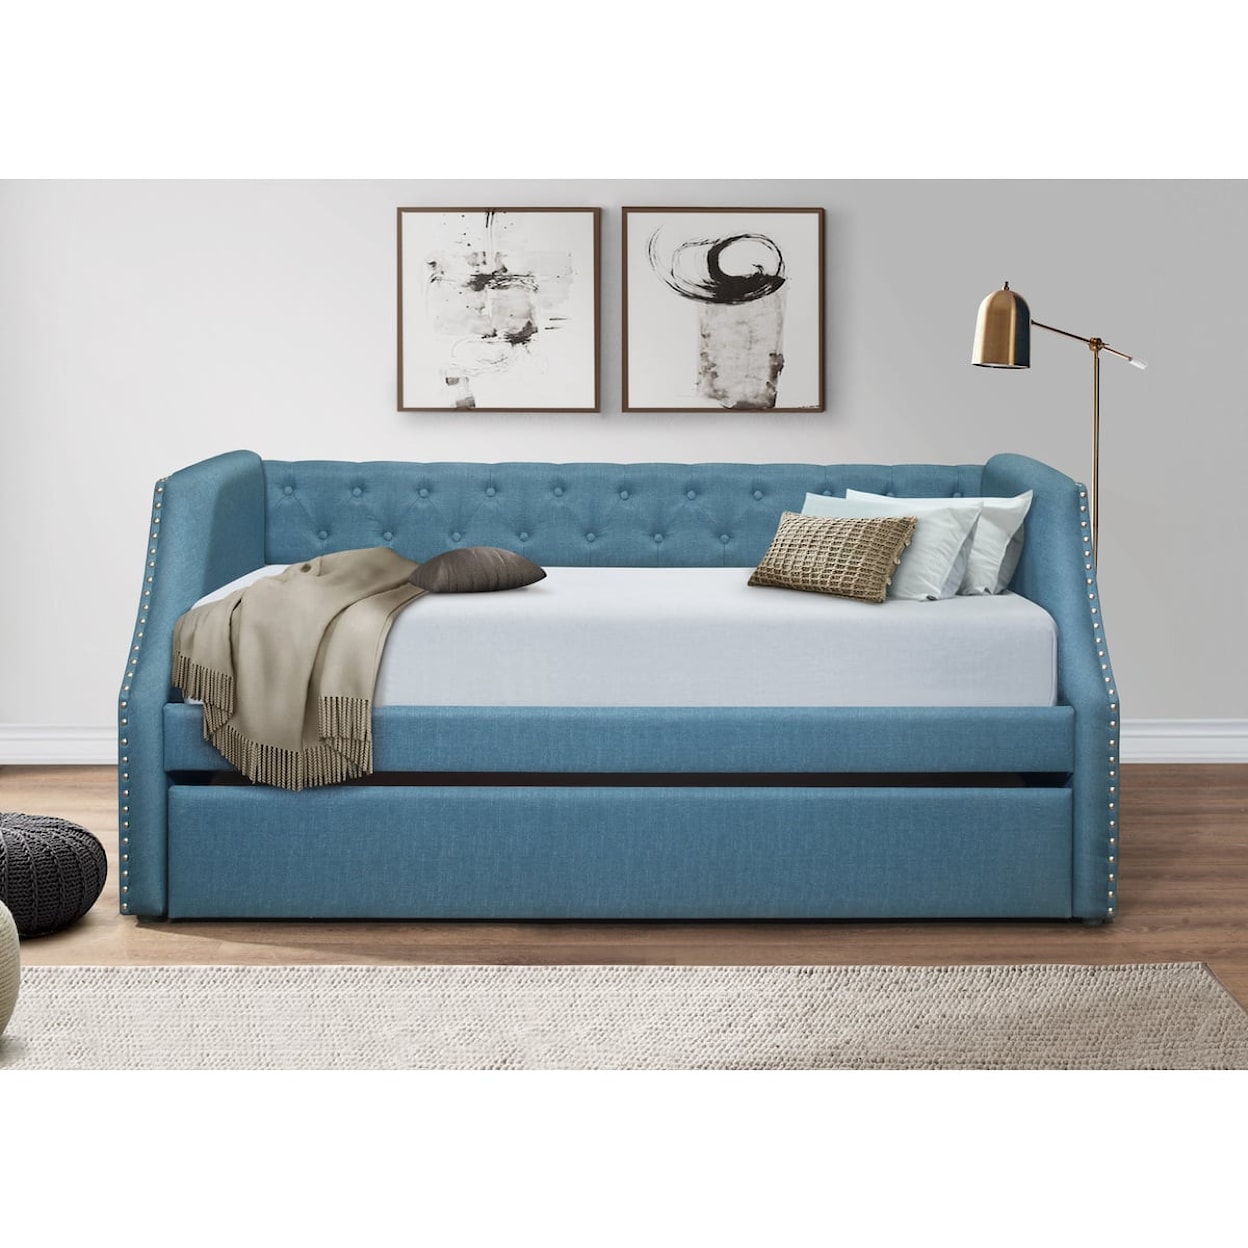 Homelegance Corrina Daybed with Trundle